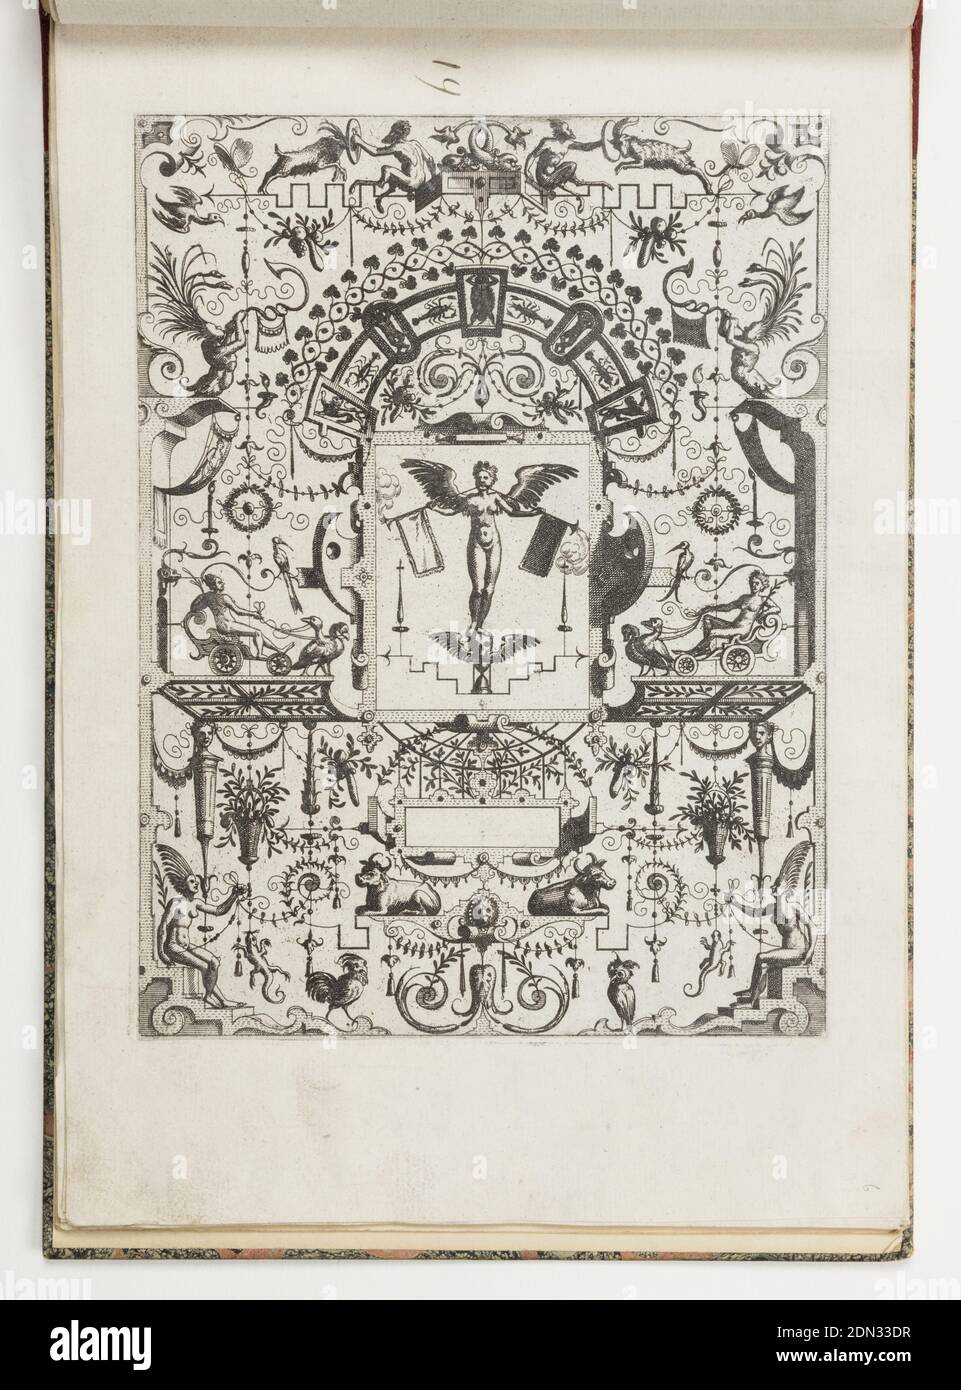 Plate 19, from Grotteßco in diverßche manieren (Various Grotesques), Hans Vredeman de Vries, Dutch, 1527 - ca. 1606, Jan van Doetechum the Elder, Dutch, active 1554 - ca. 1600, Lucas van Doetechum, Dutch, after 1584, Gerard de Jode, Flemish, 1509 - 1591, Etching on laid paper, Grotesque panel. In center, a winged figure stands on a skull and hourglass, blowing two trumpets. She is flanked by two chariots pulled by birds., France, 1564, ornament, Print Stock Photo